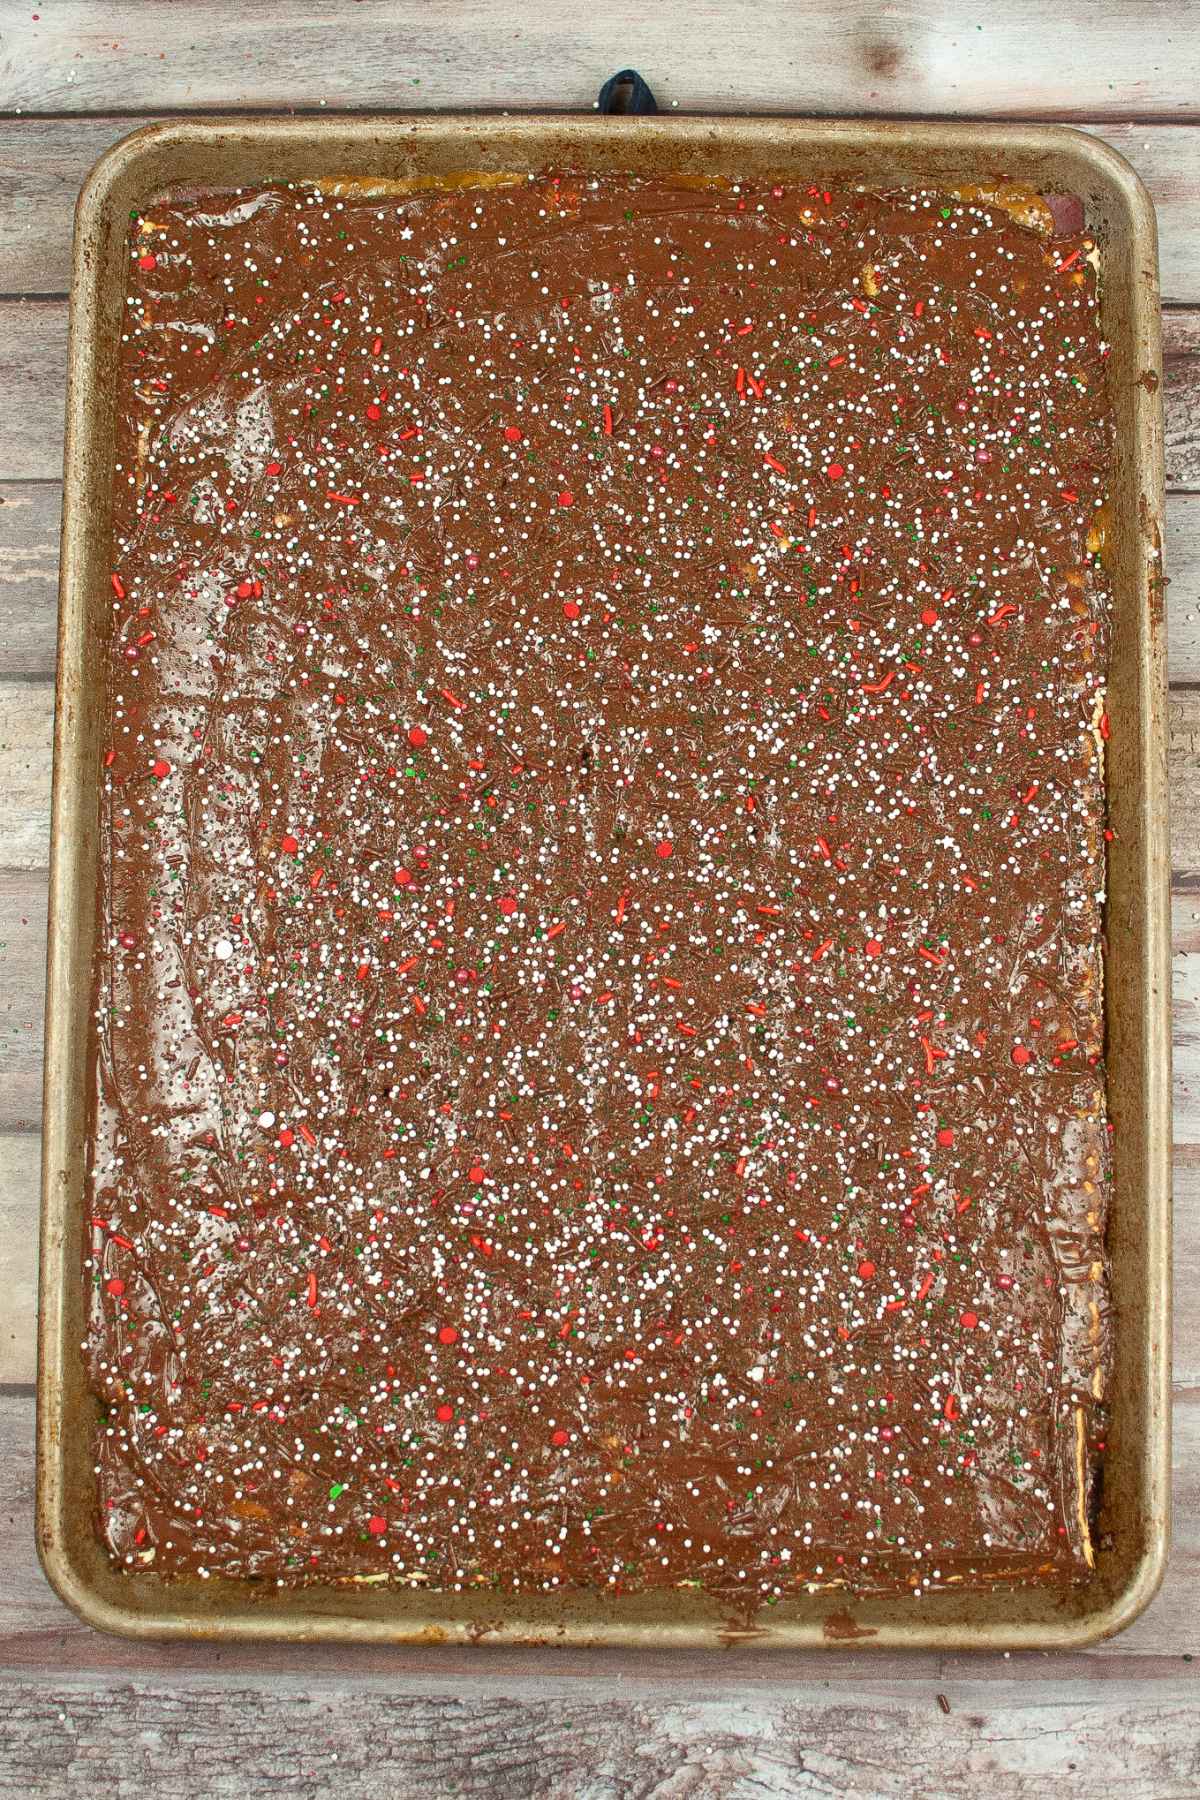 Christmas Crack with chocolate spread over top and red, white, and green sprinkles.